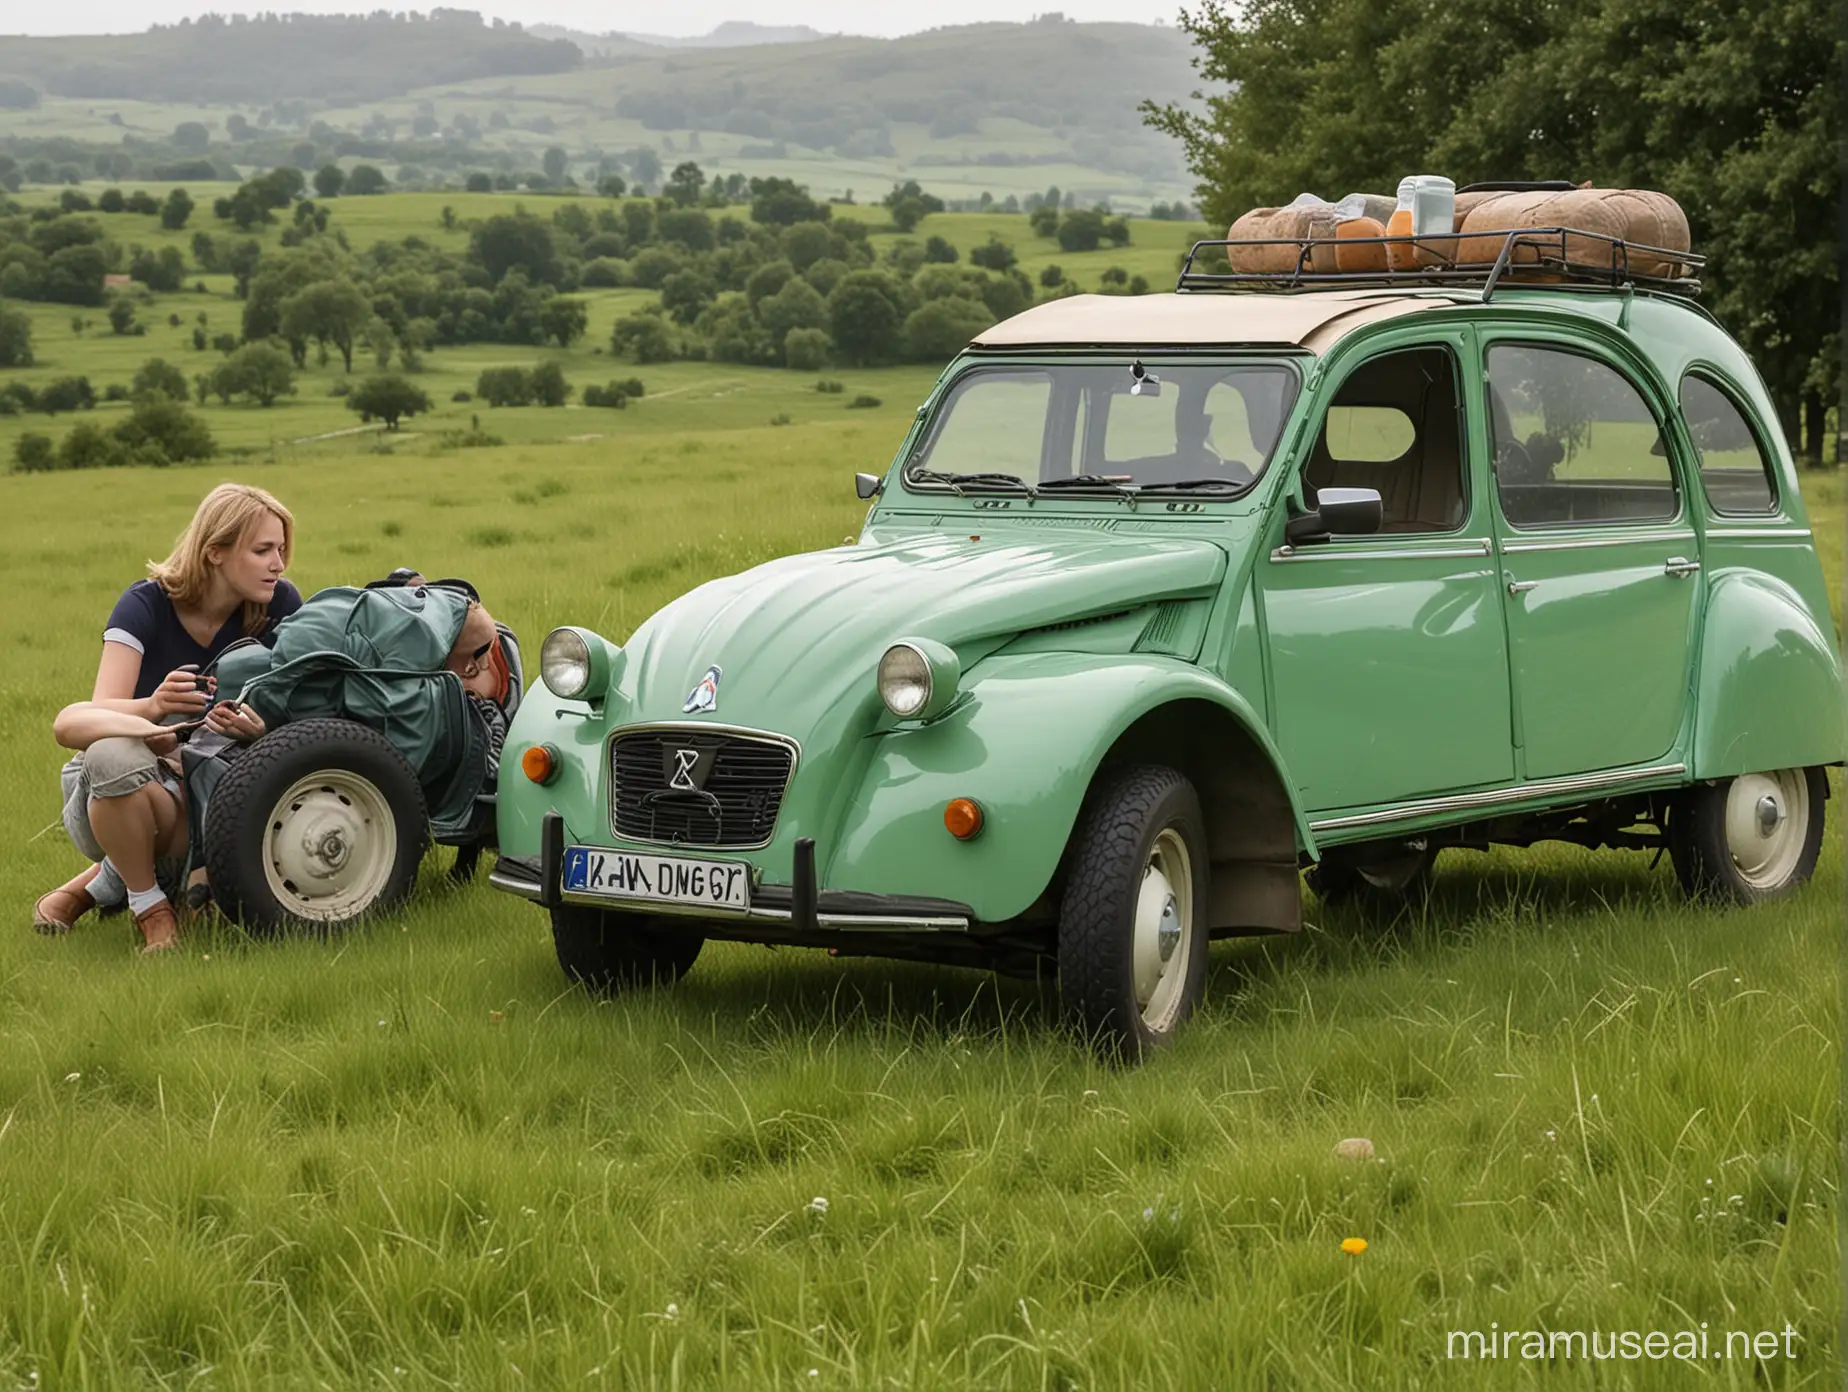 Three women parked a green Citroen 2CV in a meadow, with a bottle under the rear wheel and a stone under the front wheel.